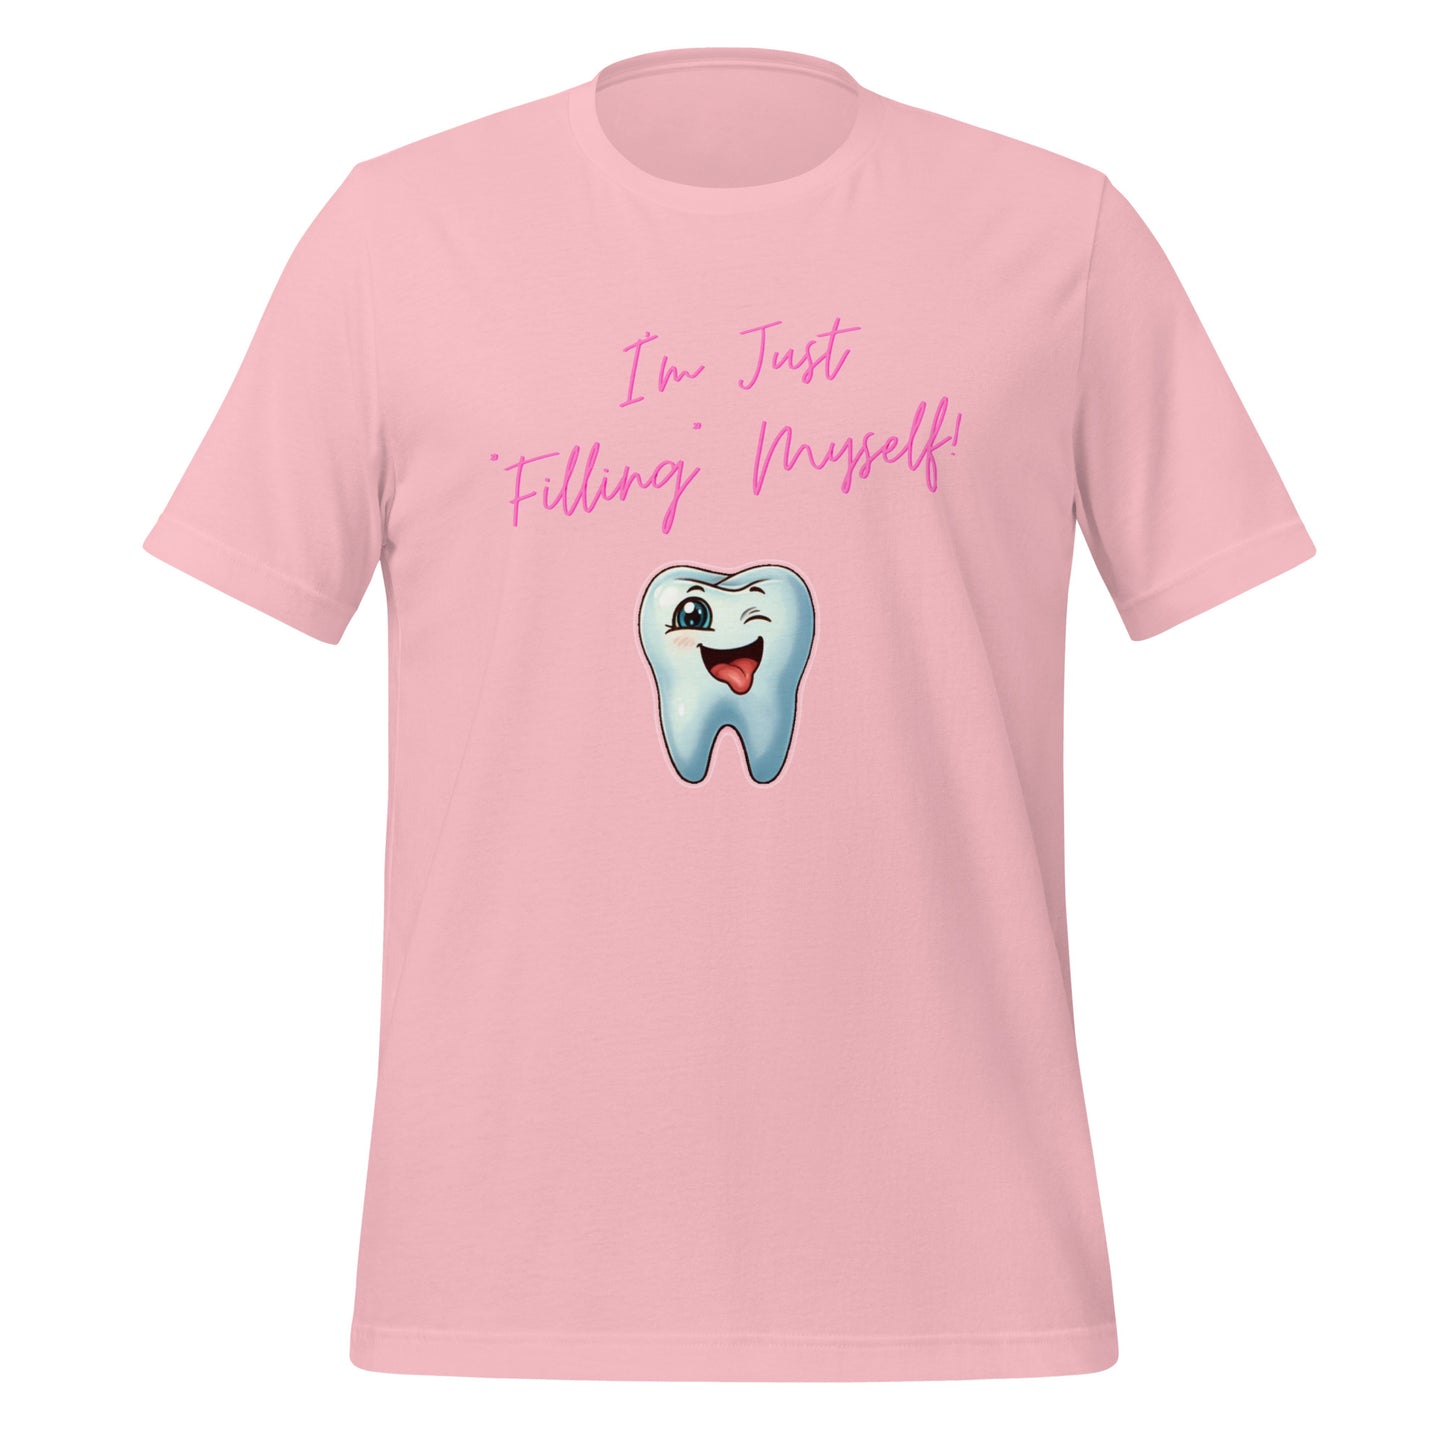 Flirtatious winking cartoon tooth character with the phrase "I'm just filling myself!" Ideal for a funny dental t-shirt or a cute dental assistant shirt. Pink color. 